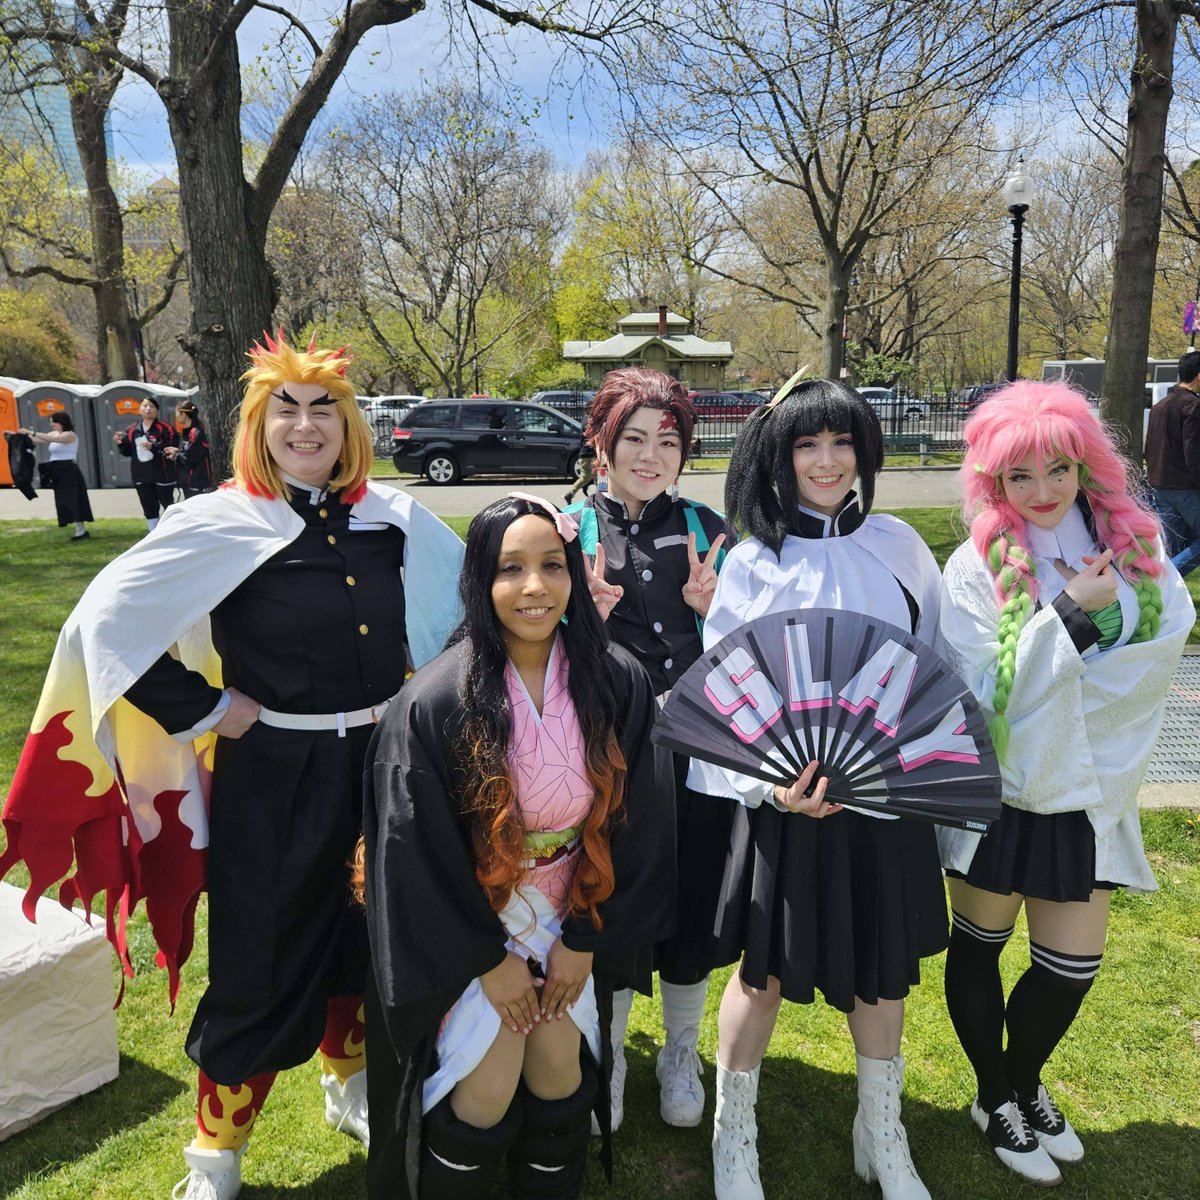 Our Demon Slayer performance starts at 1pm today! Head over to the main stage to see the show and stop on by the cosplay posing workshop at 2:10pm!